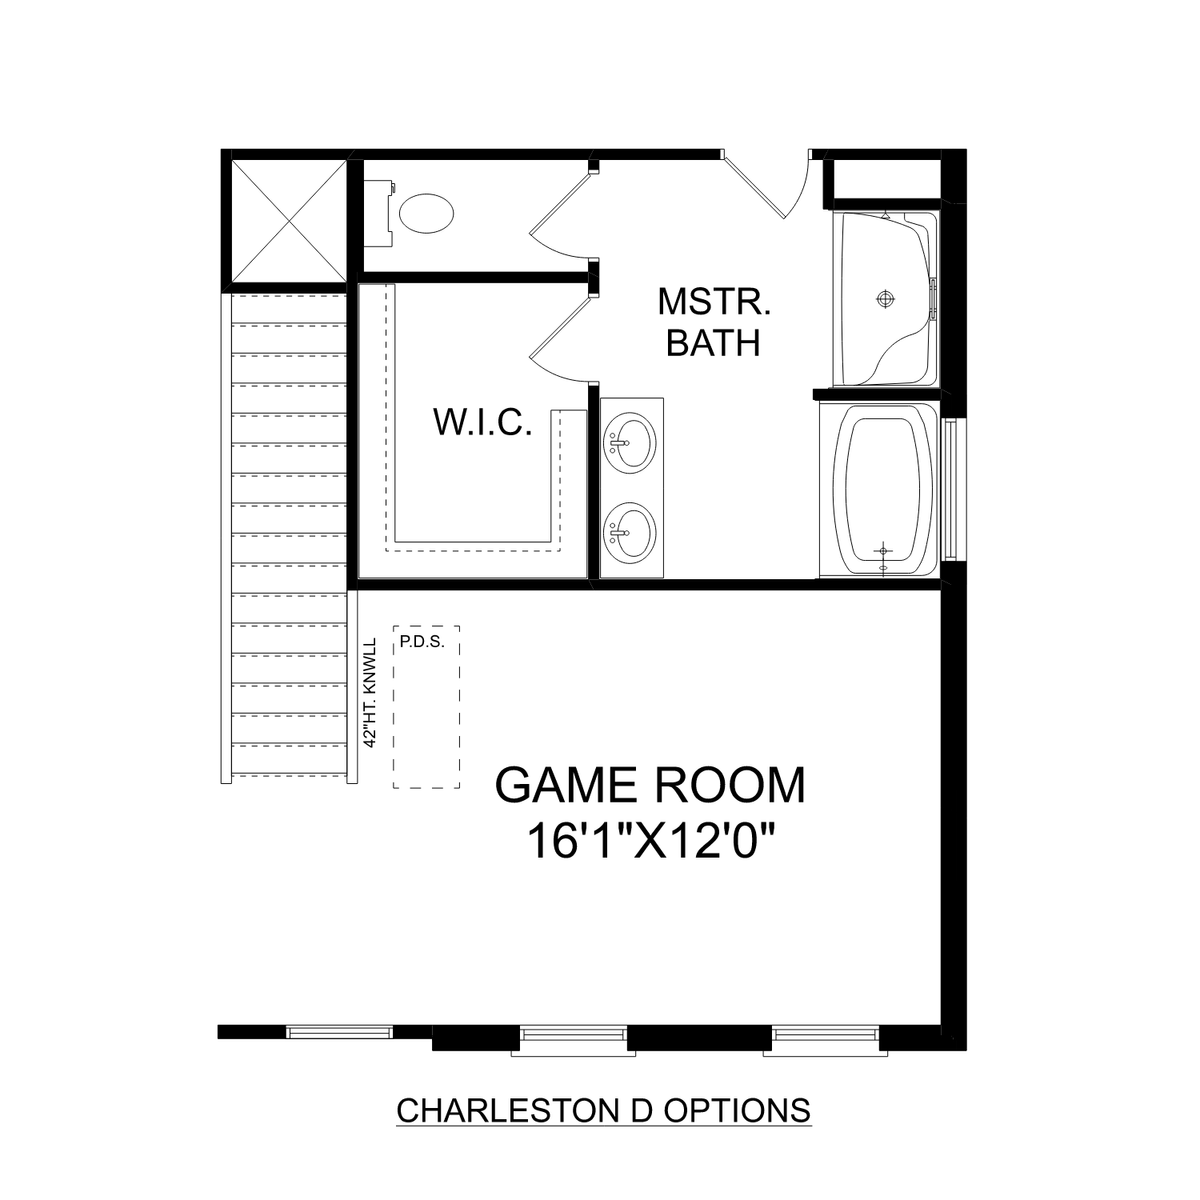 3 - The Charleston D buildable floor plan layout in Davidson Homes' Old Stone community.